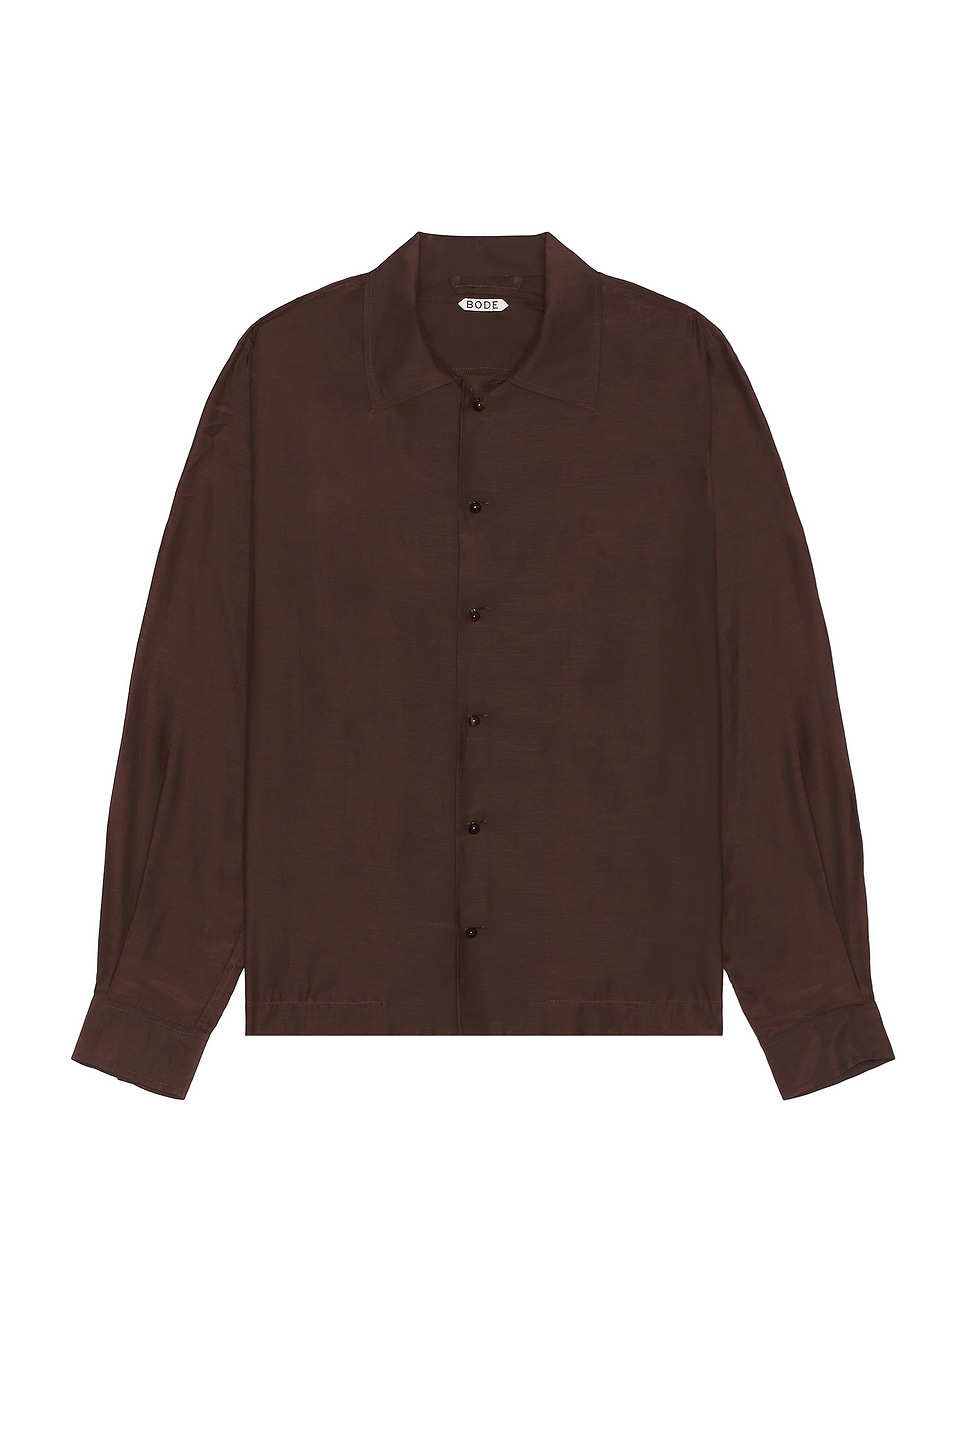 Heartwood Long Sleeve Shirt in Brown